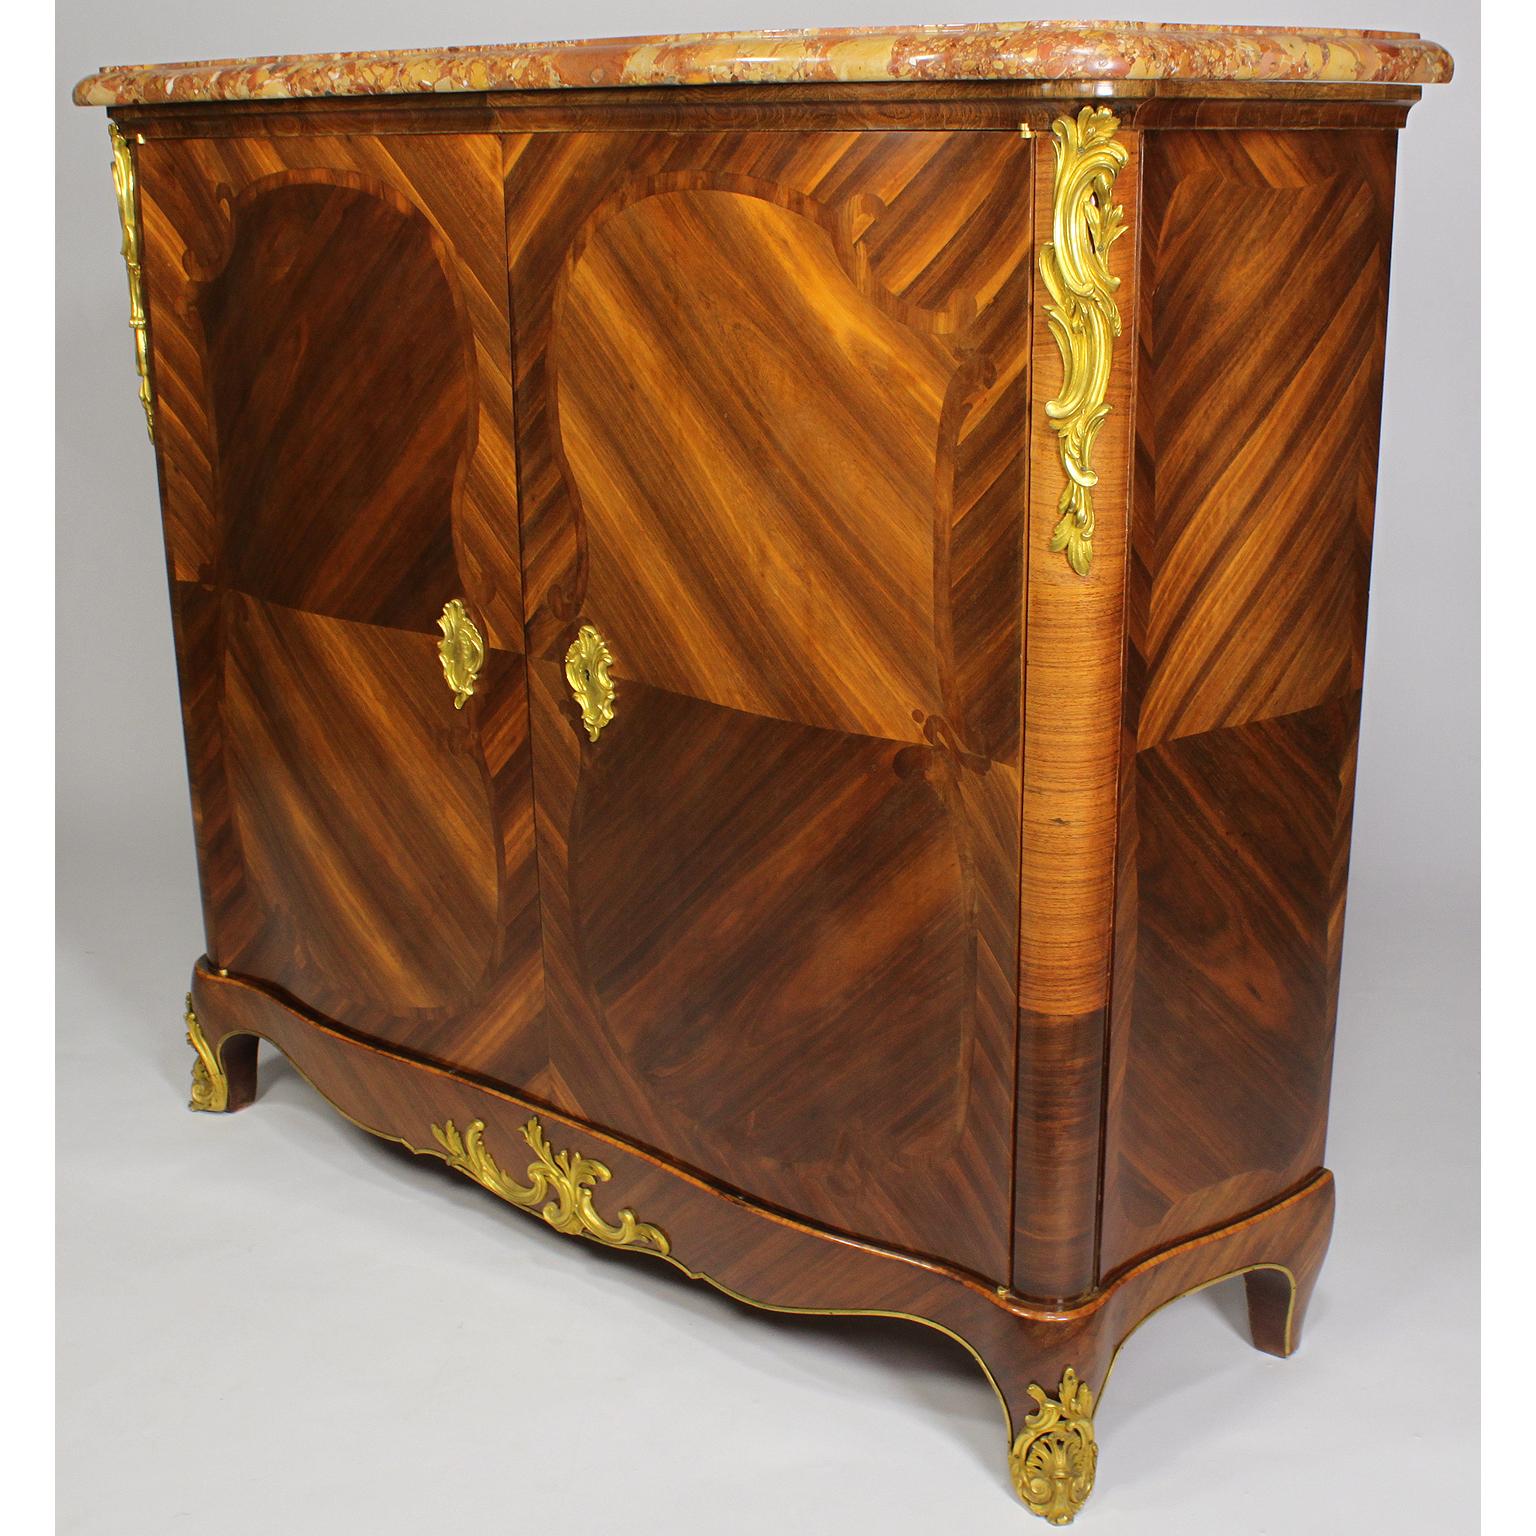 A fine pair of French 19th century Louis XV style tulipwood and gilt bronze mounted two-Door Meuble D'Appui (Side-Cabinets) with a Brêche d'Alep marble top. The slender cabinets, each with two front doors reveling a pair of indoor shelves,